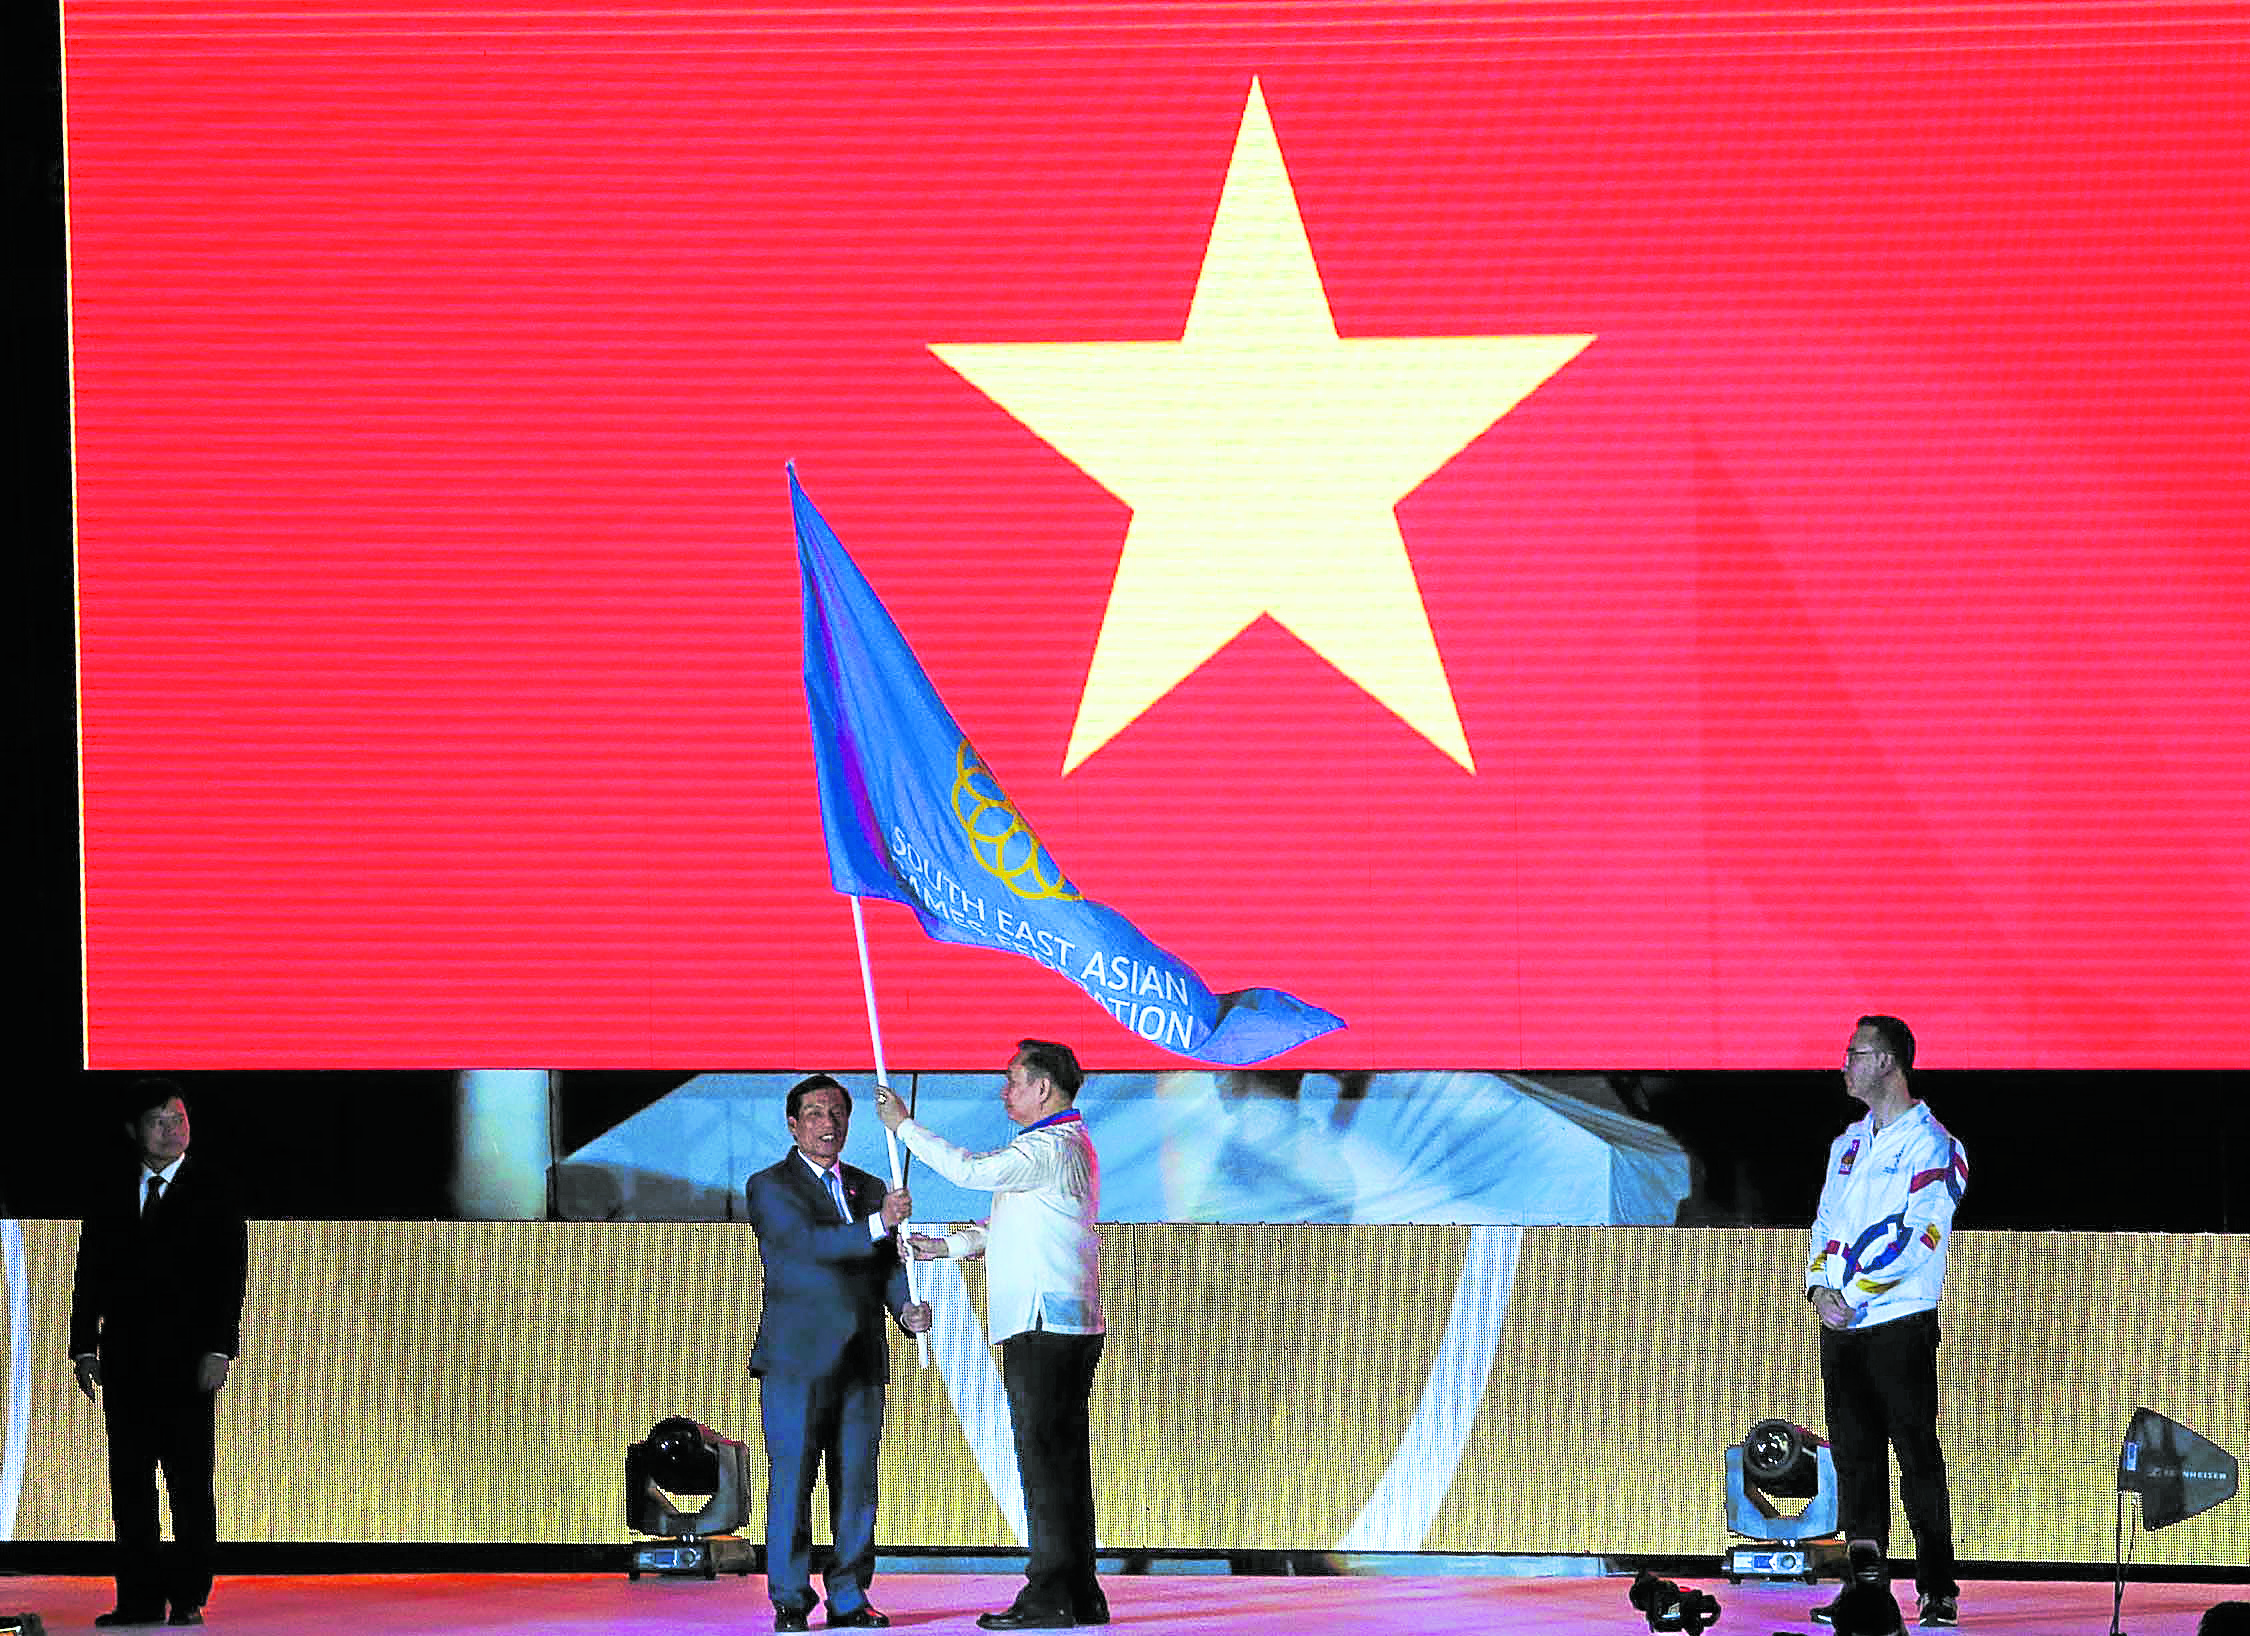 Vietnam receives the SEA Games federation flag during turnover ceremonies of then 2019 Southeast Asian Games. —MARIANNE BERMUDEZ